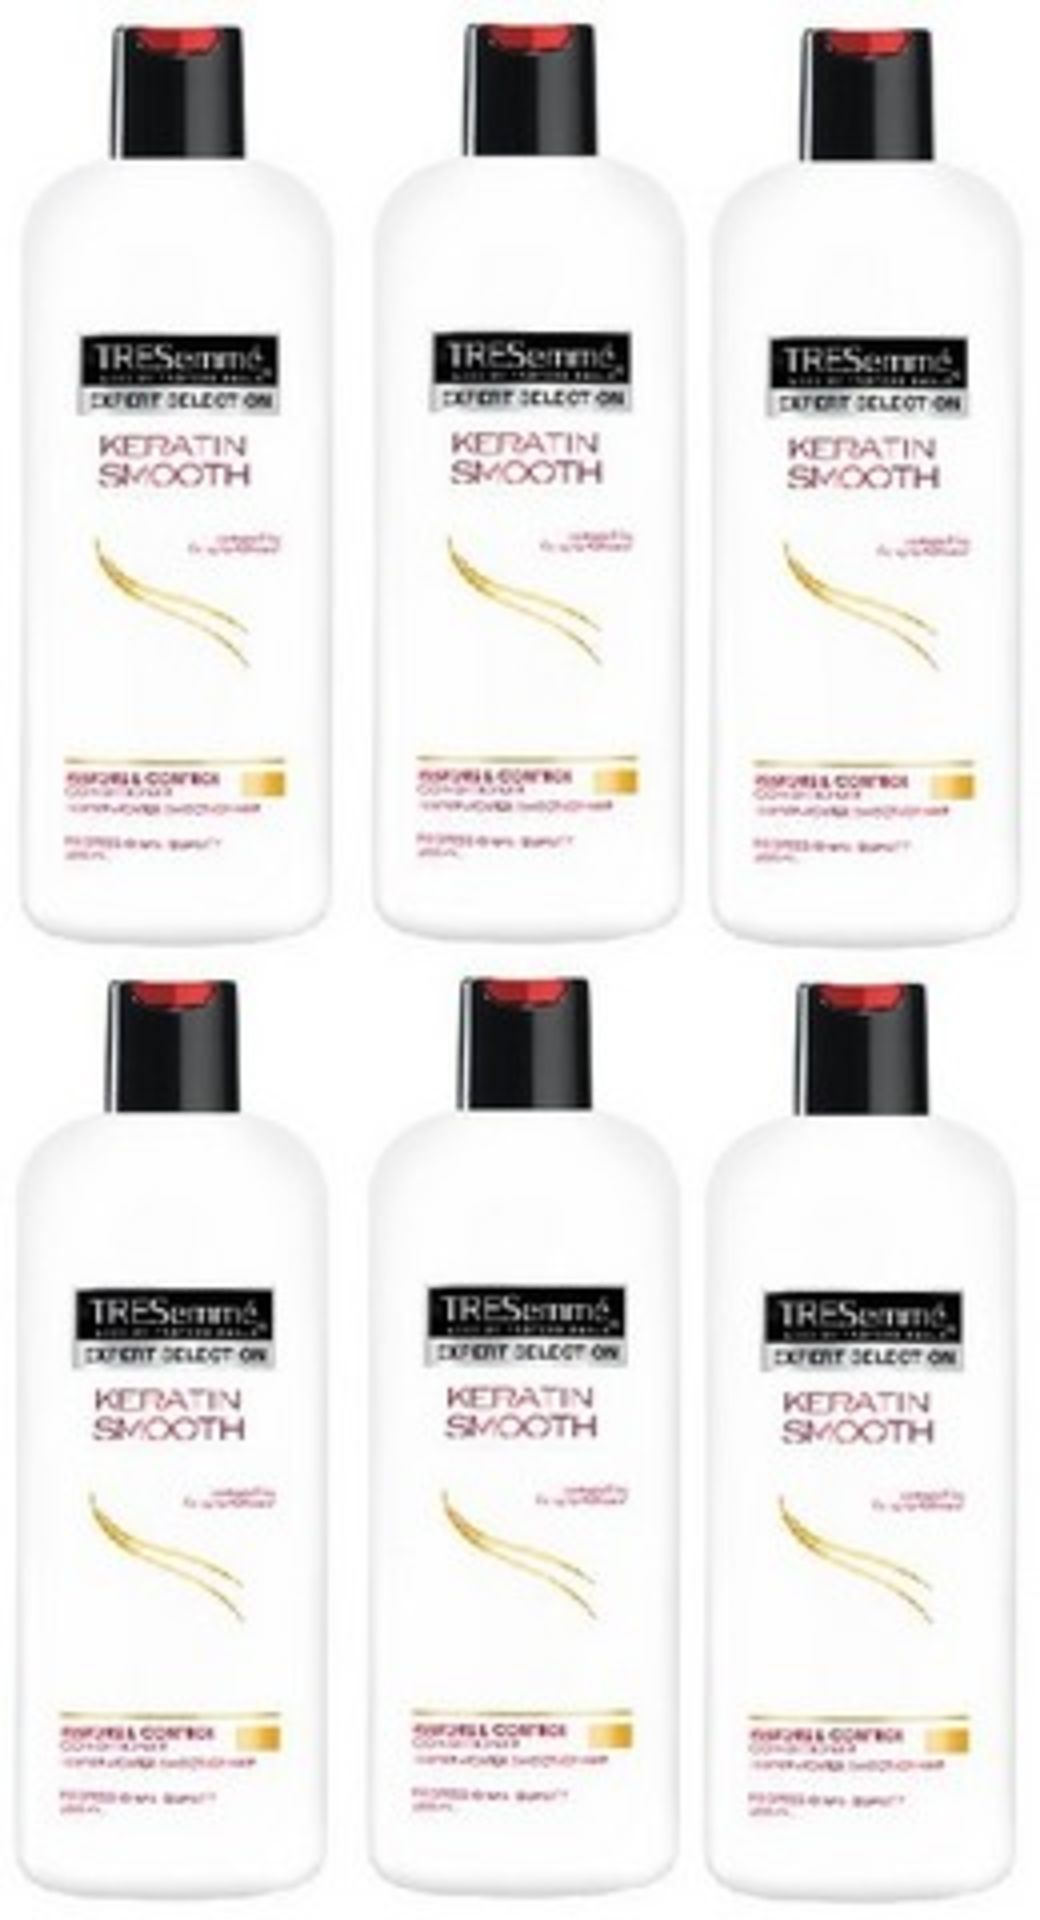 V Brand New Lot Of 6 TRESemme Professional Keratin Smooth Restoring Conditioner 500ml Total Boots